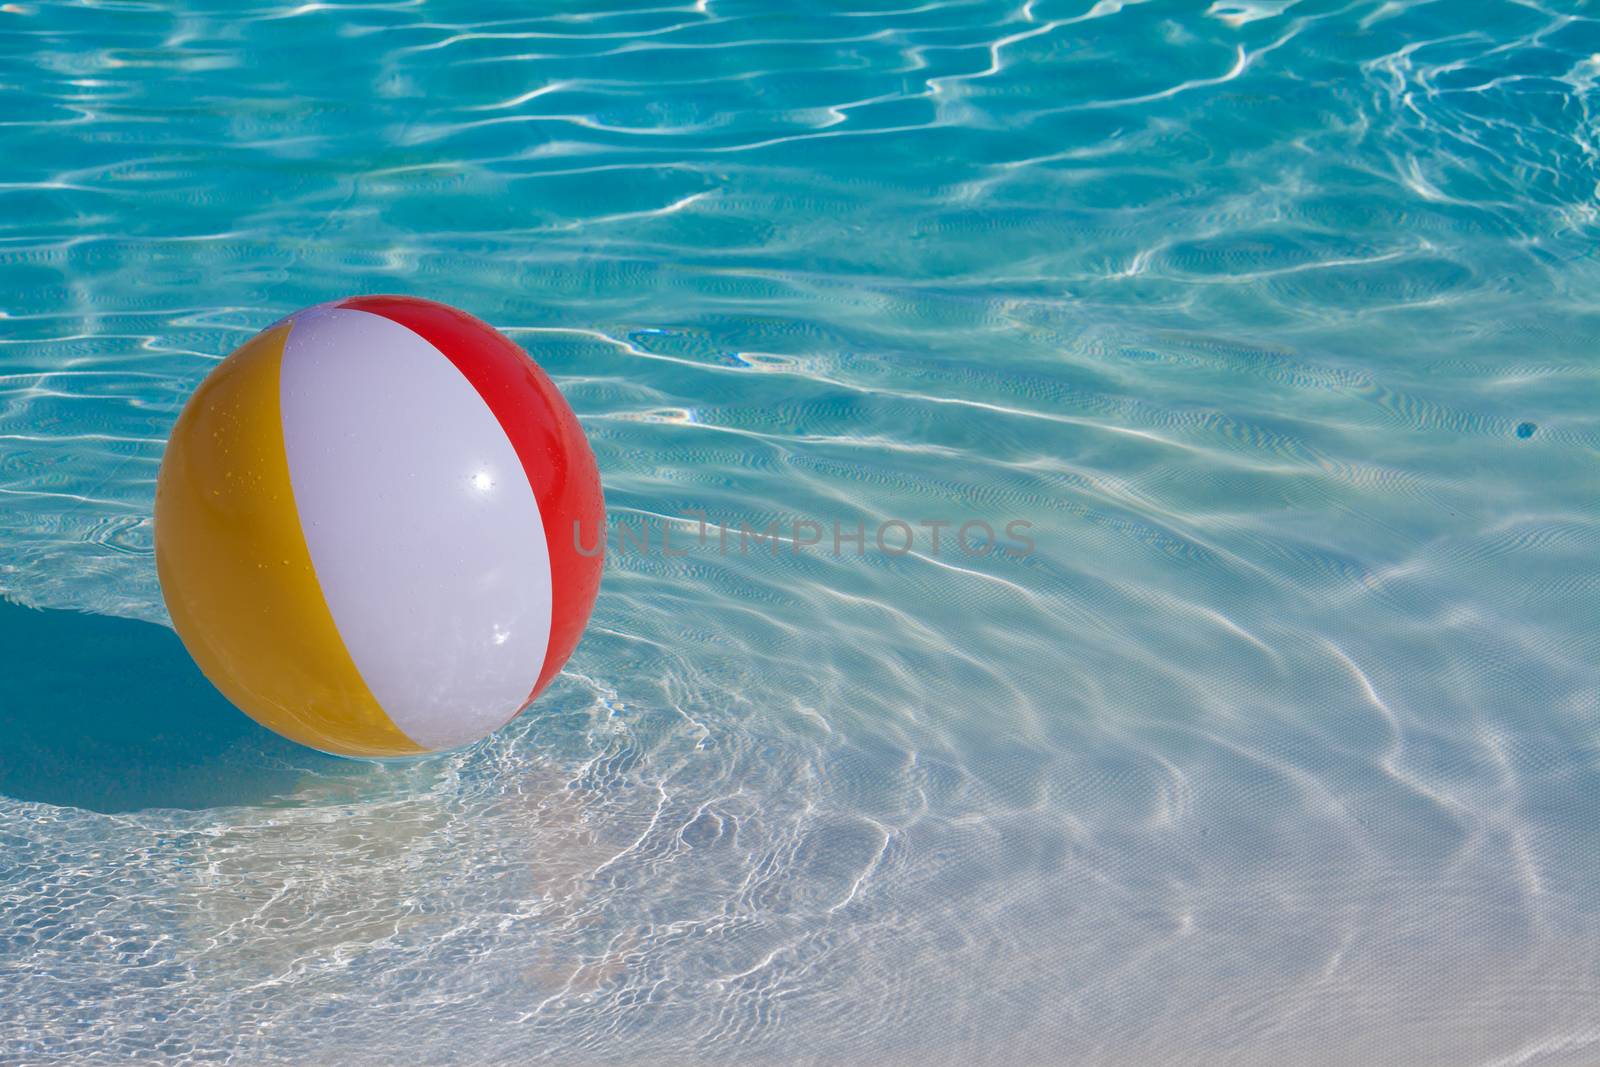 Inflatable colorful ball floating in a swimming pool